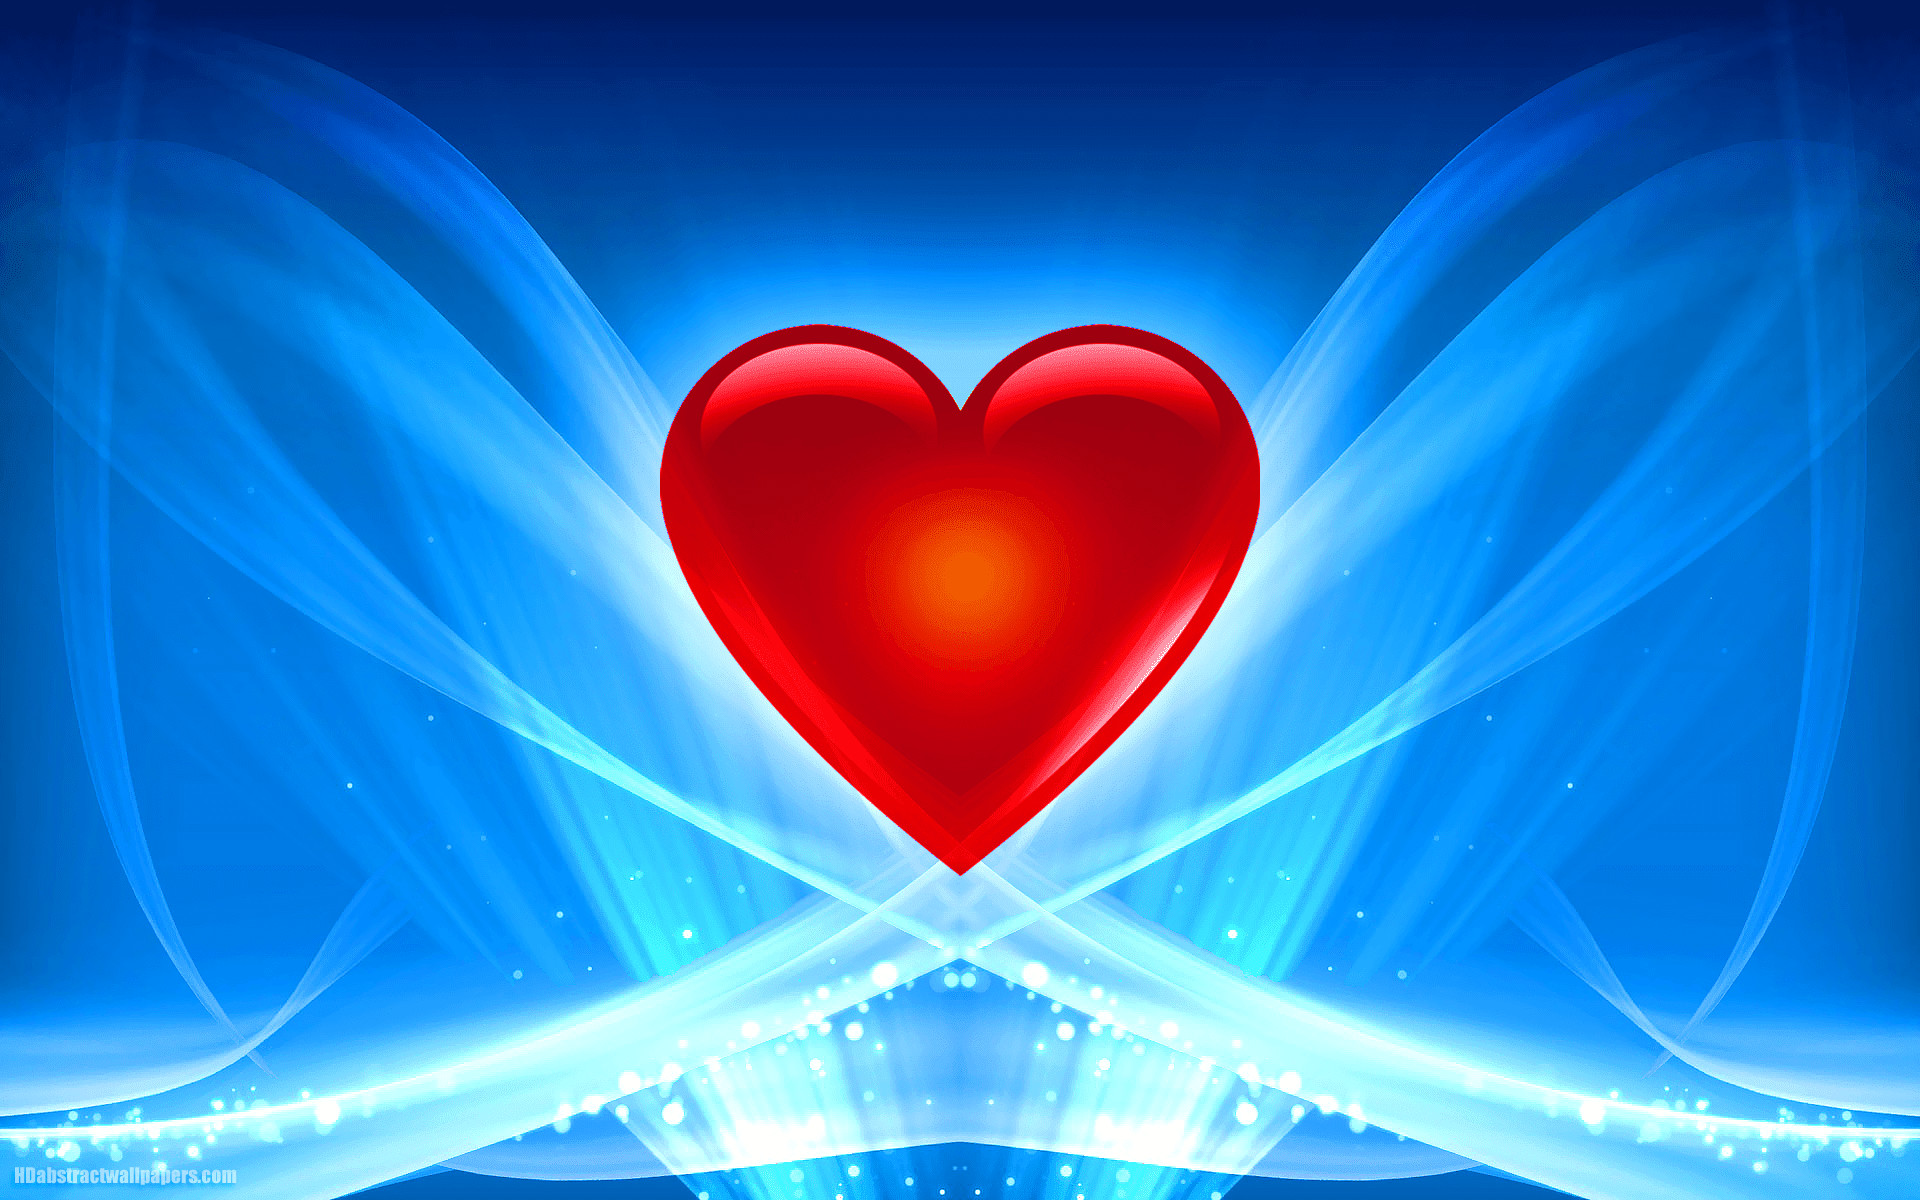 1920x1200 Abstract blue wallpaper with red love heart and lights. A very beautiful  blue abstract wallpaper for PC, laptop, tablet or smartphone.